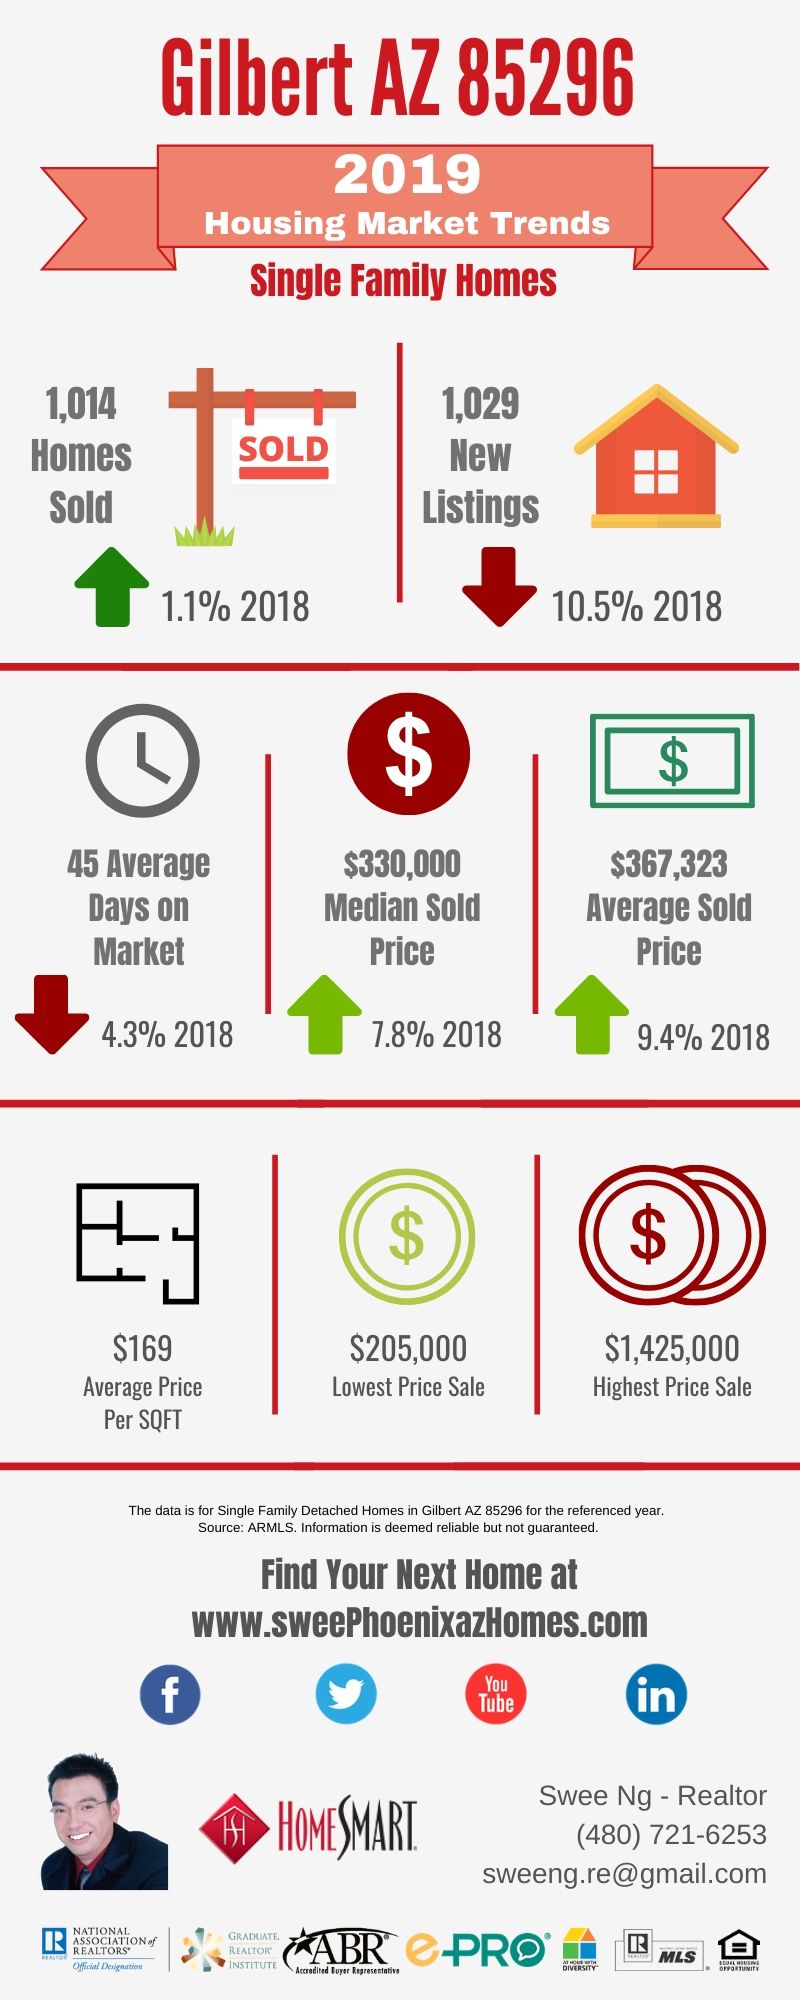 Gilbert AZ 85296 Housing Market Trends Report 2019 by Swee Ng, Real Estate and House Value